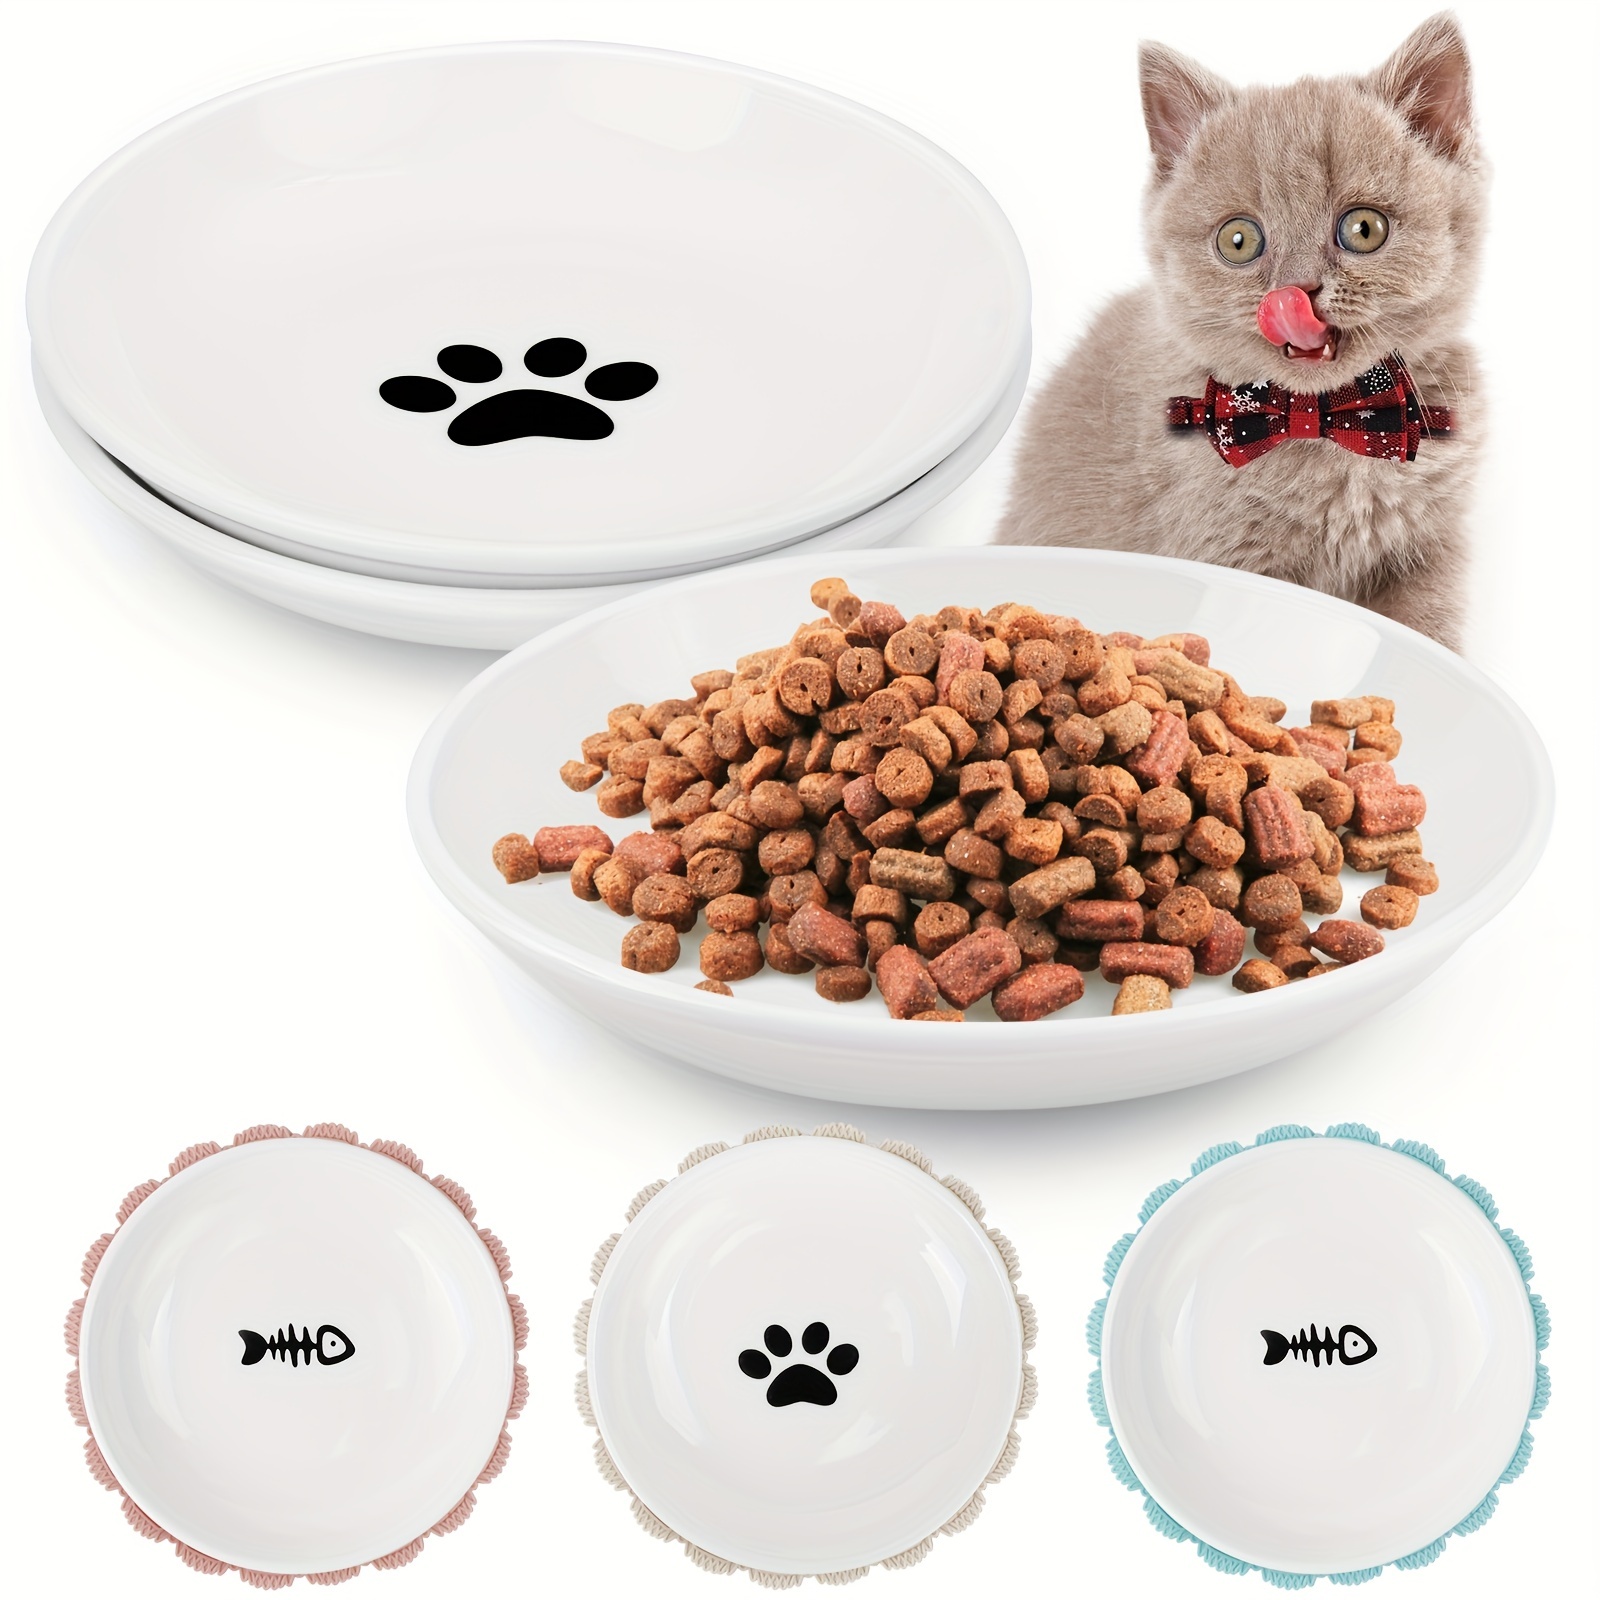 Small Ceramic Cat Food Bowl - Wide Shallow Cat Bowl with Non-Slip Mat -  Whisker Friendly Cat Feeding Bowls - Japanese Style Cute Cat Dish - Cat  Plates